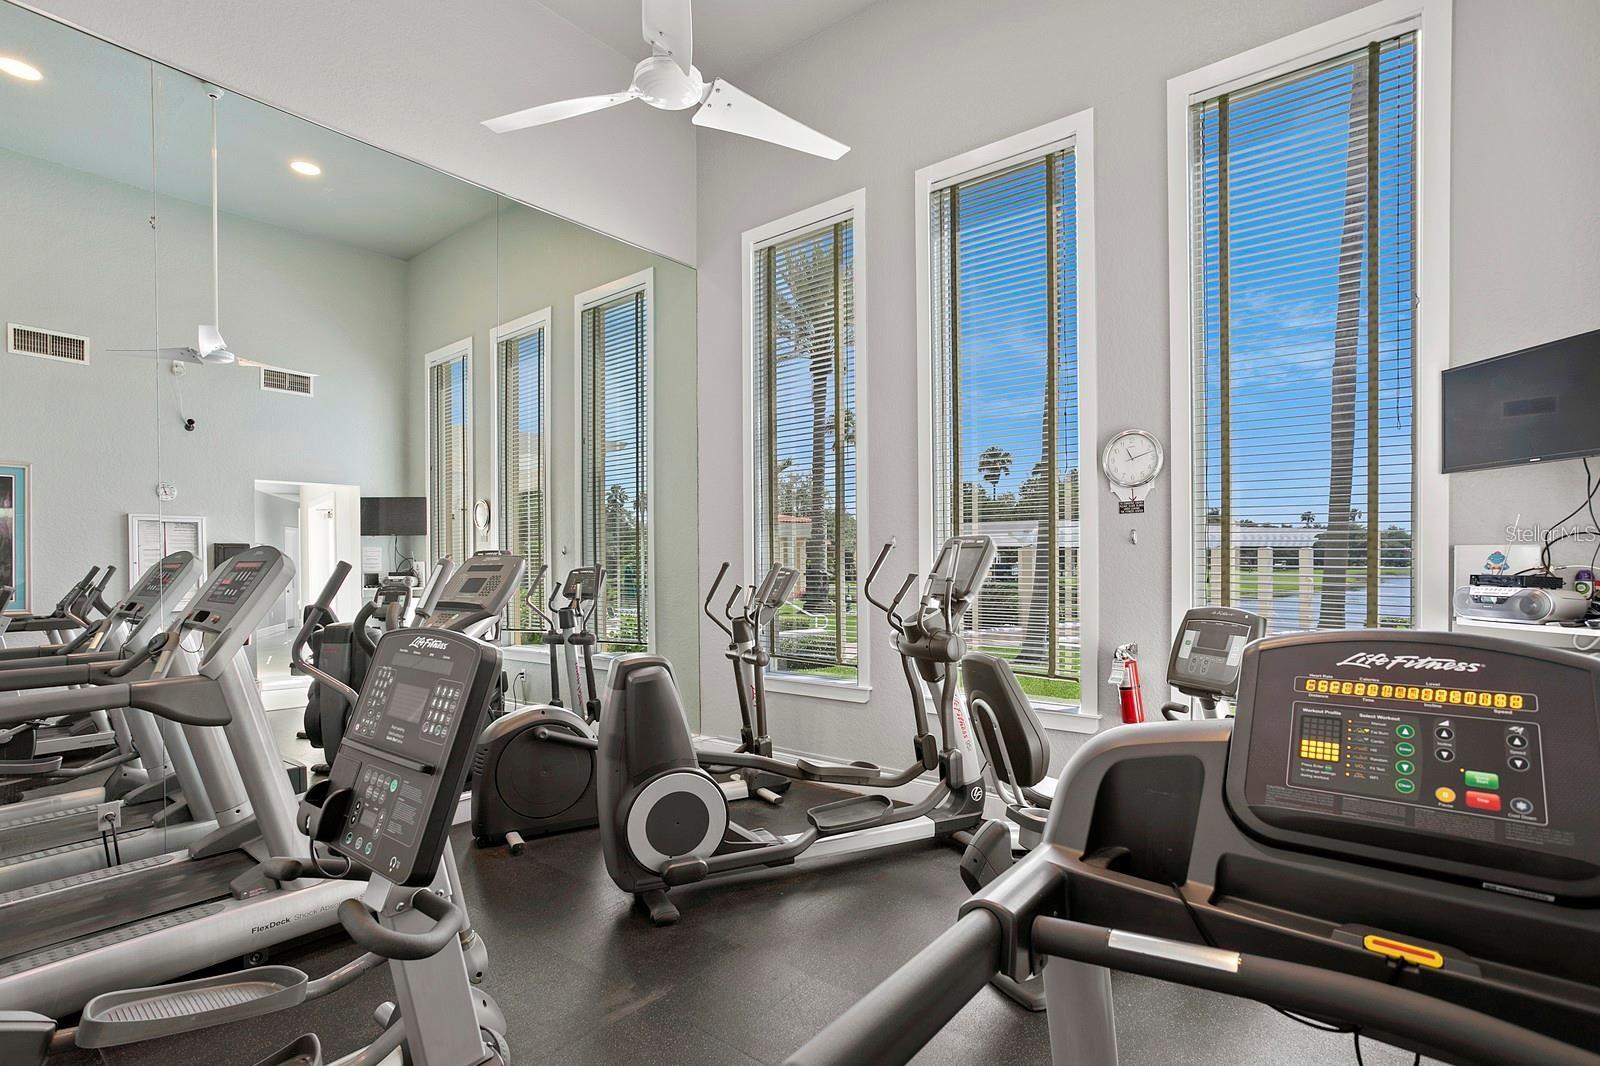 Two separate workout rooms - free weights in one, nautilus and treadmills in the other.